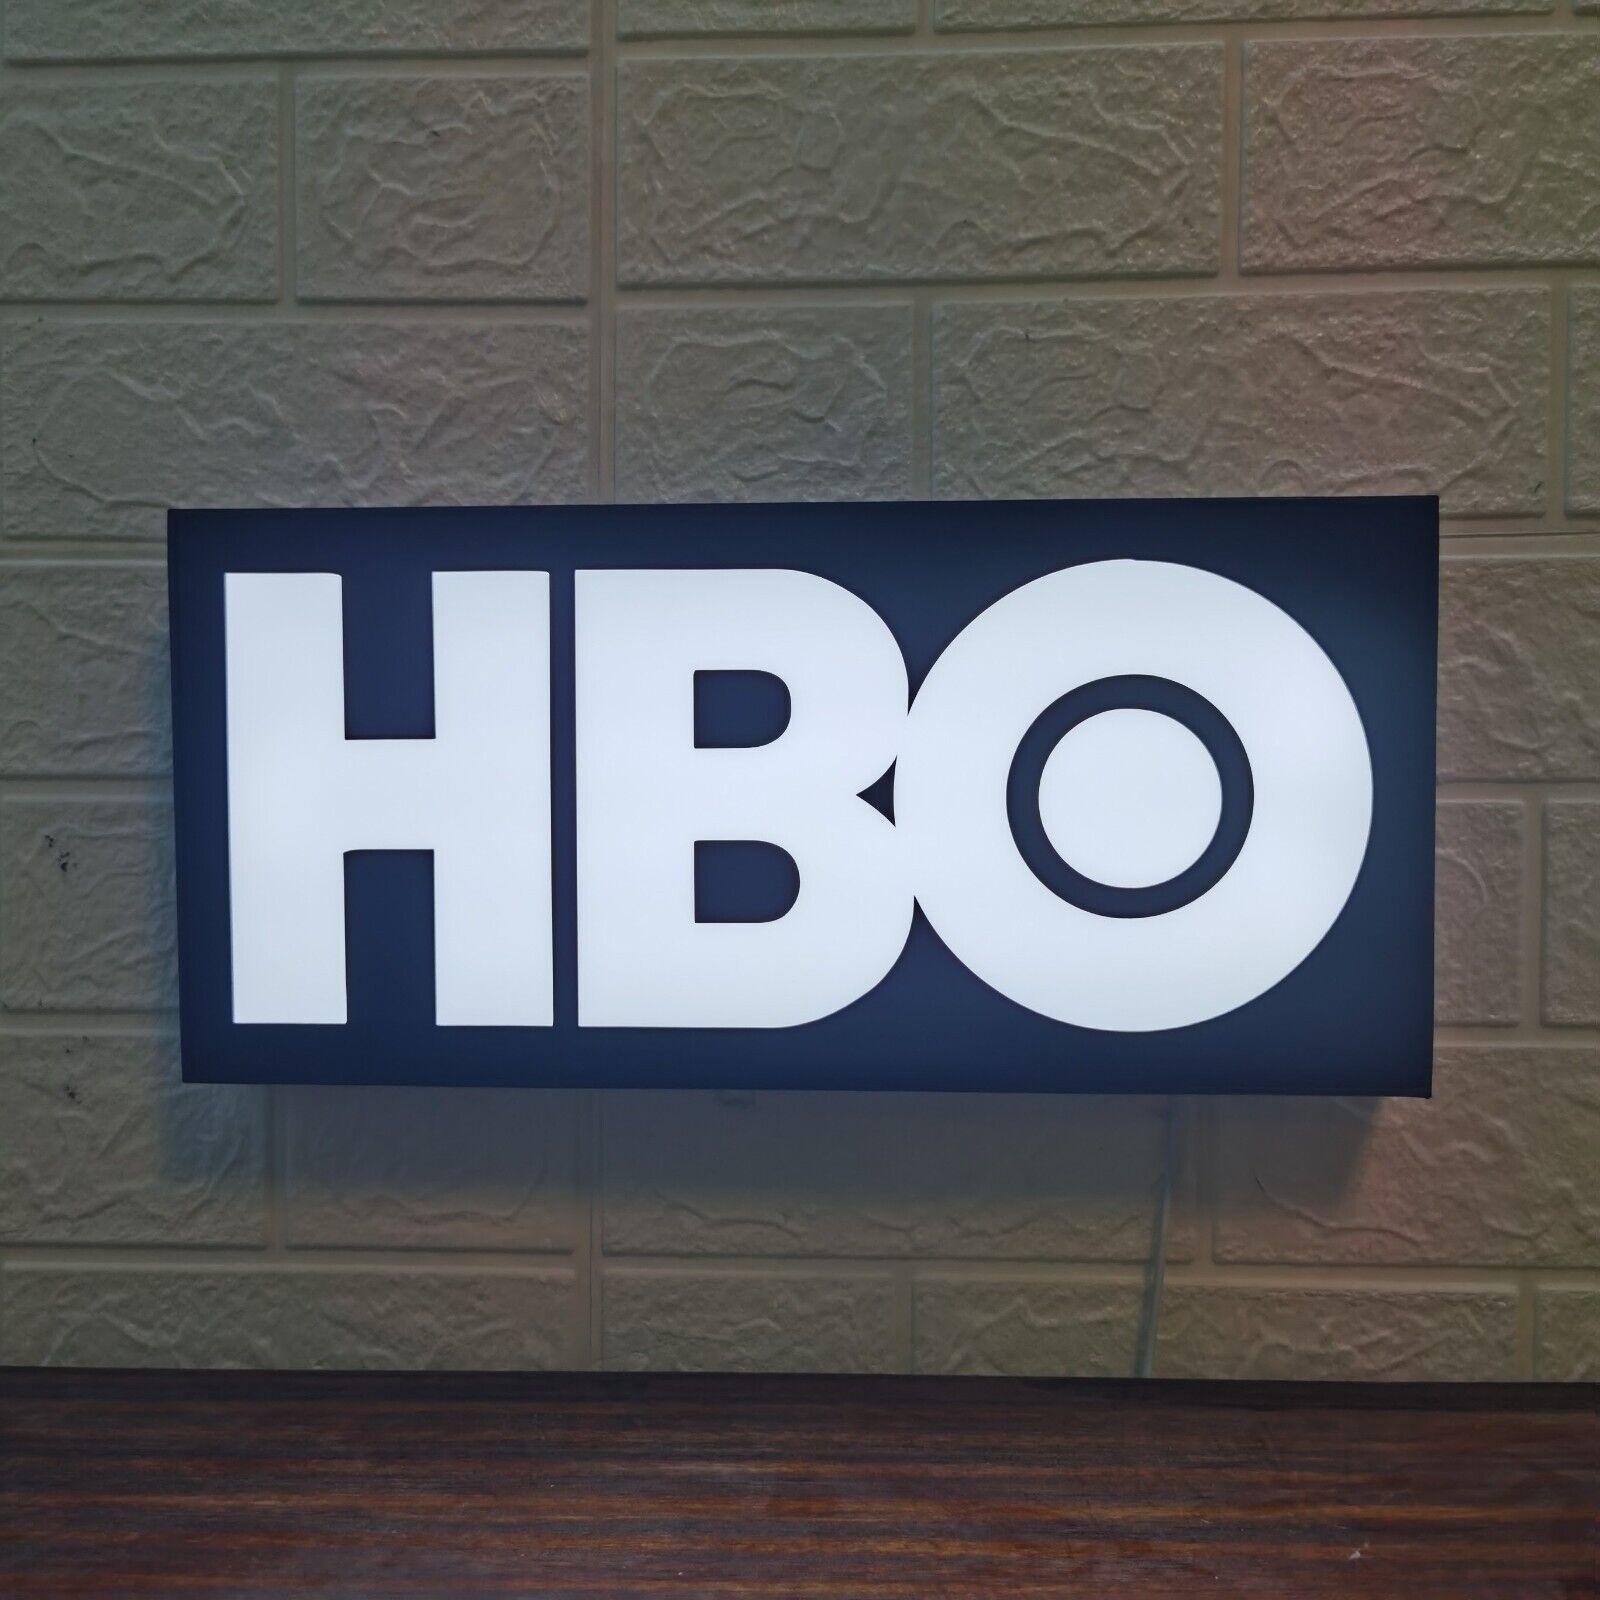 HBO Logo LED Lightbox Fully Dimmable & Powered by USB - FYLZGO Signs